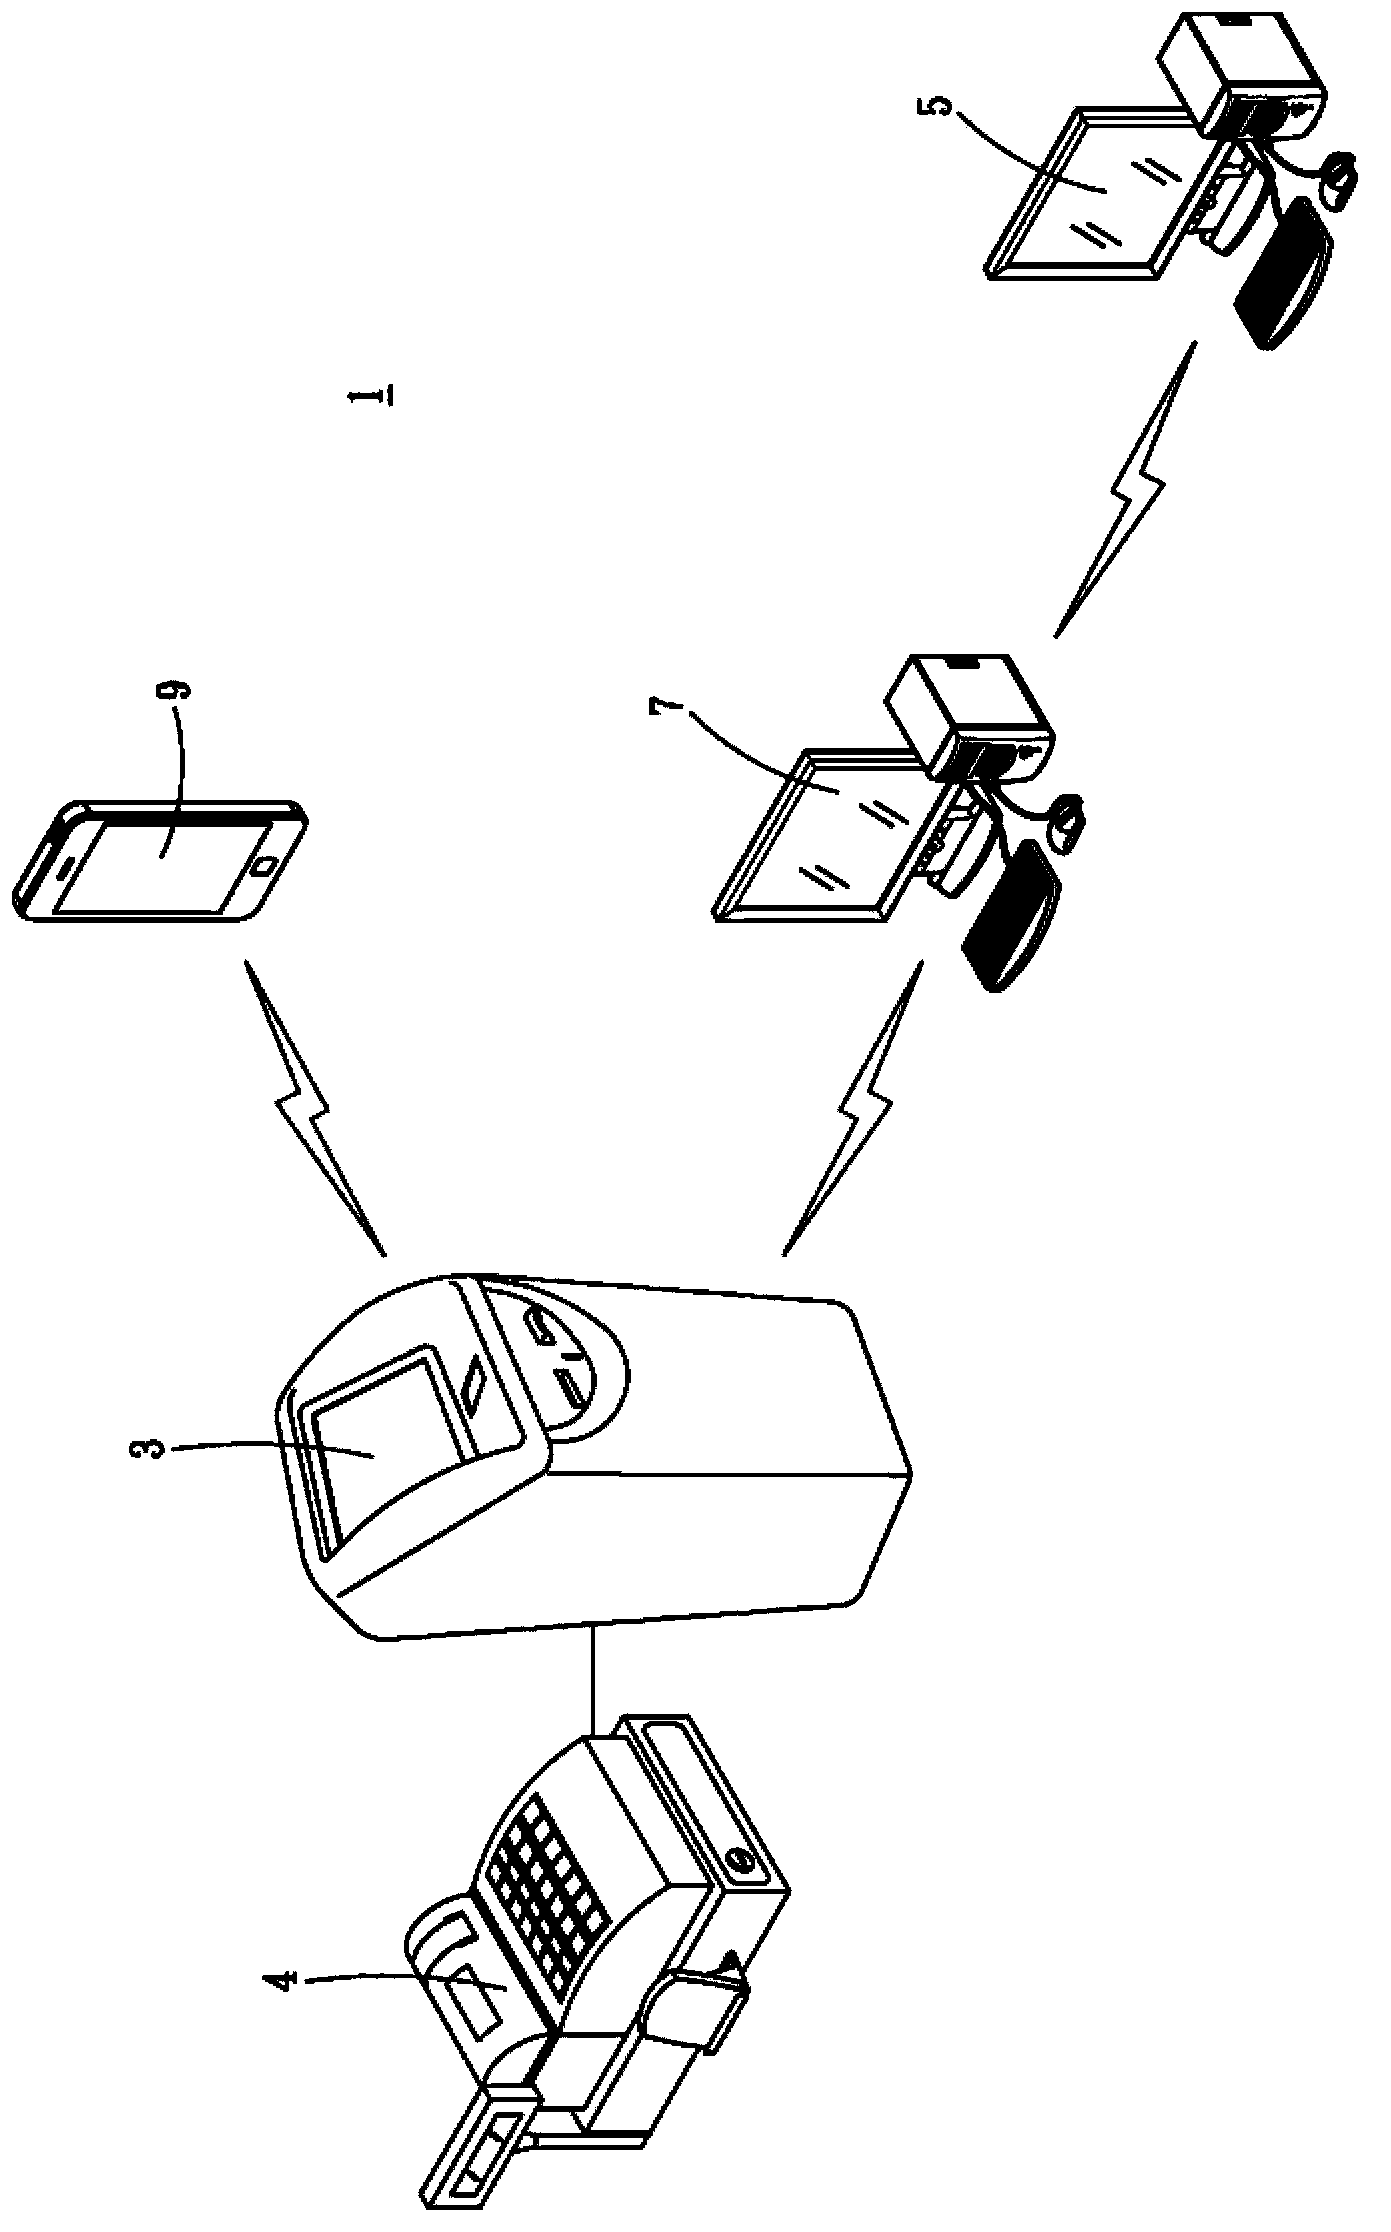 Travel insurance fast insuring device and method